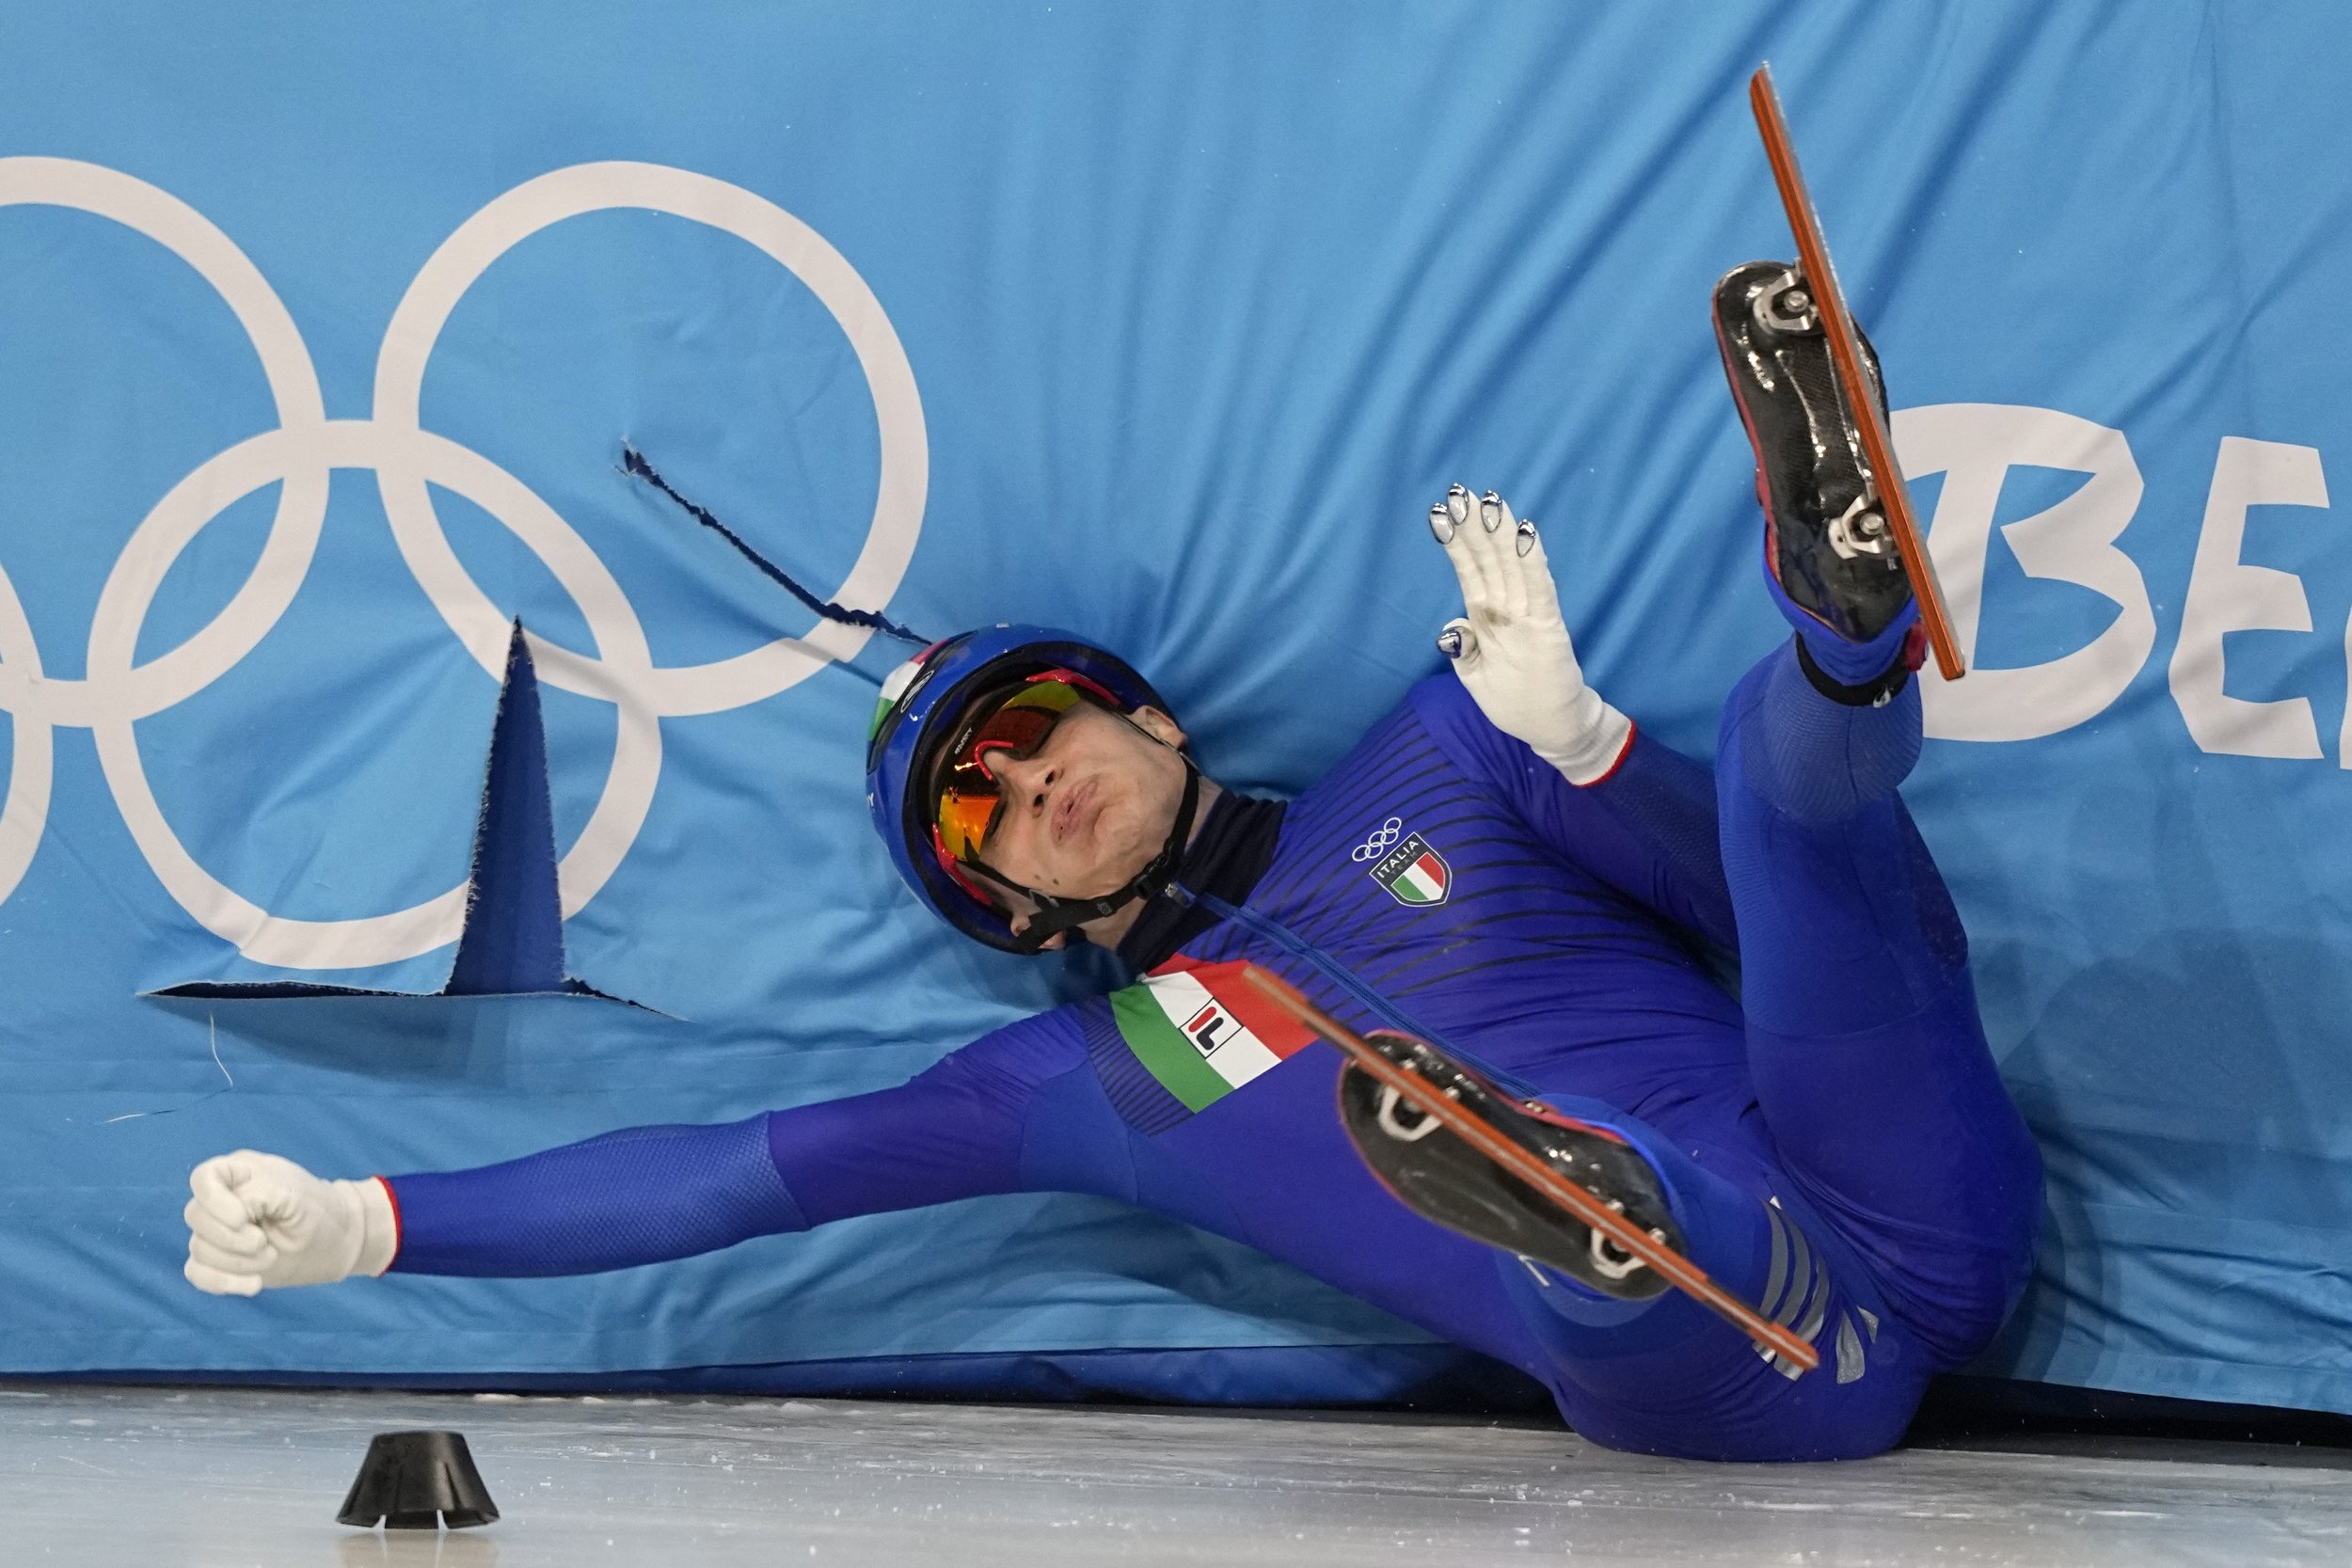  Pietro Sighel of Italy crashes during his heat of the men's 1,000-meter during the short track speedskating competition at the 2022 Winter Olympics, Saturday, Feb. 5, 2022, in Beijing. (AP Photo/David J. Phillip) 